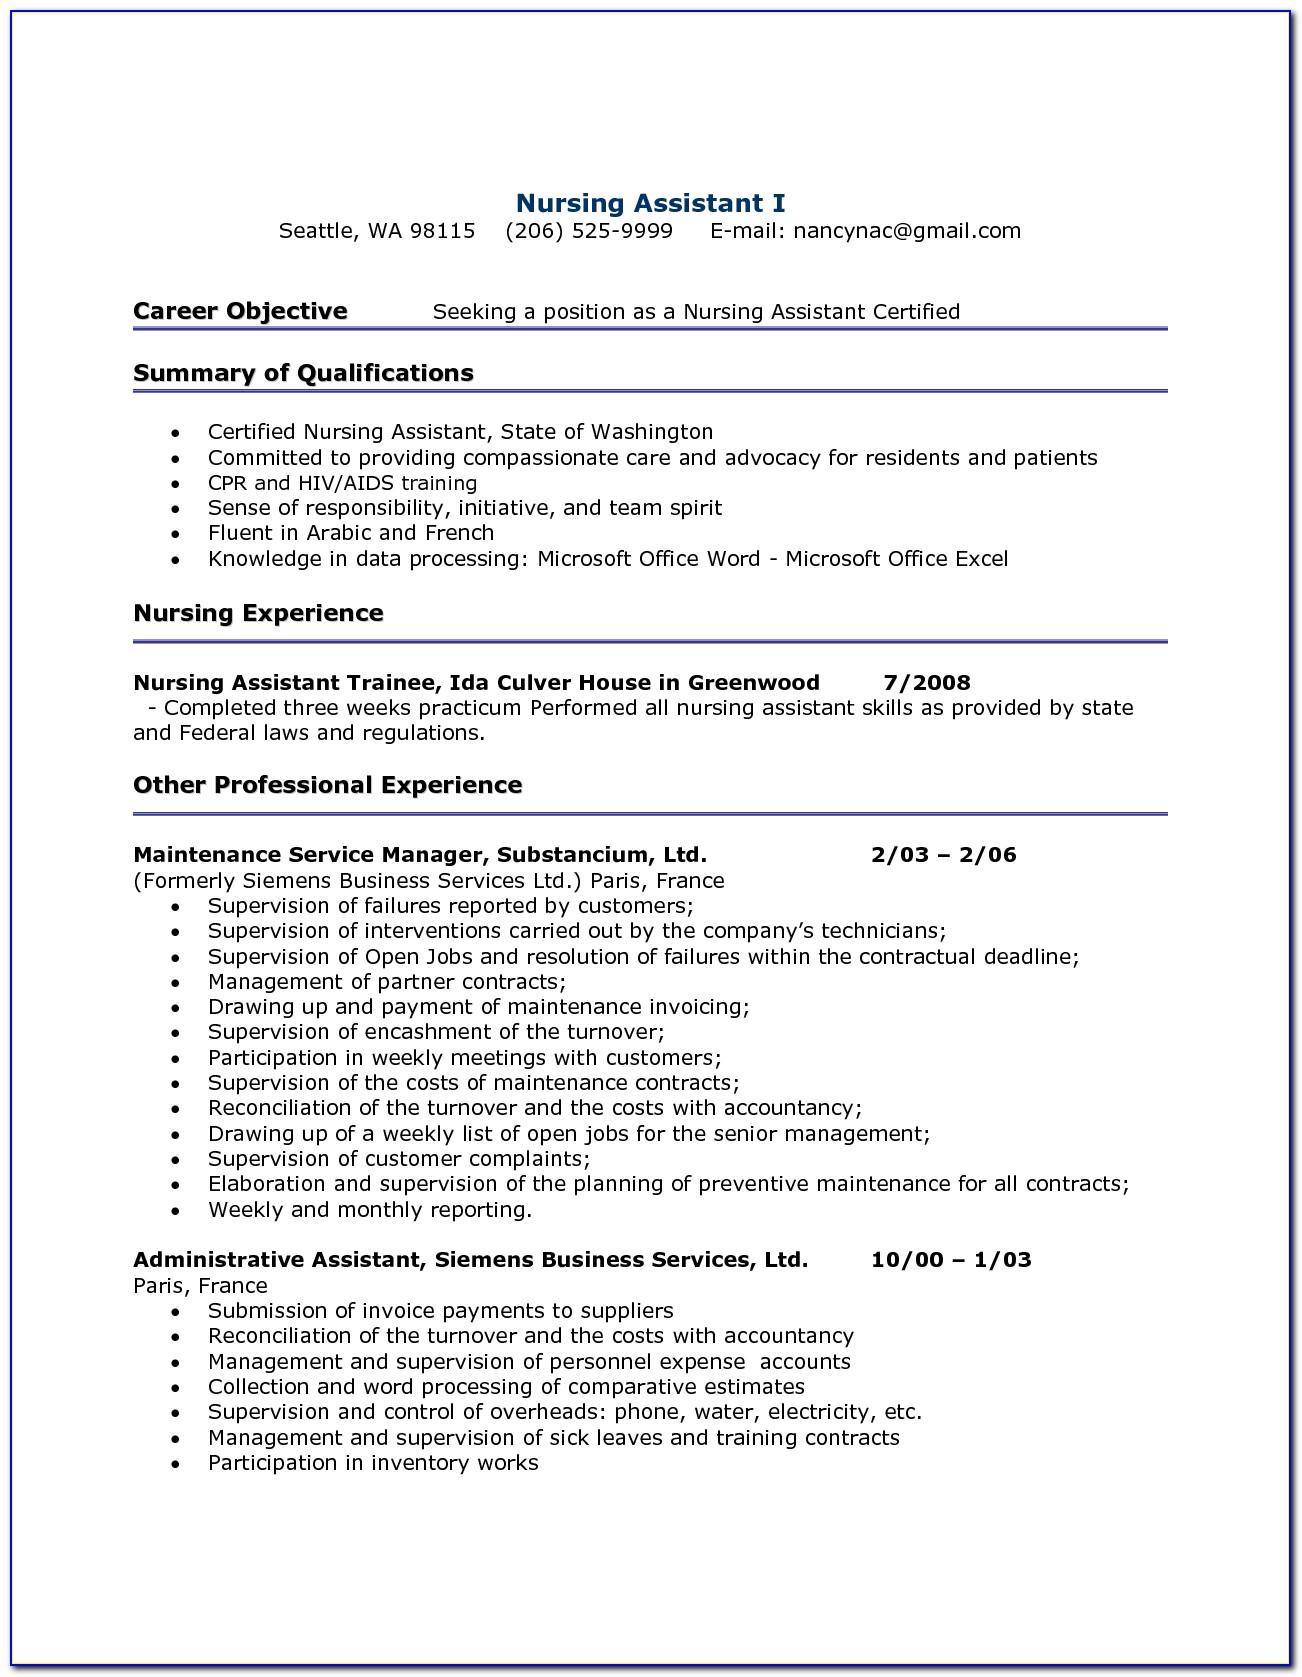 Sample Resume For Cna With Objective